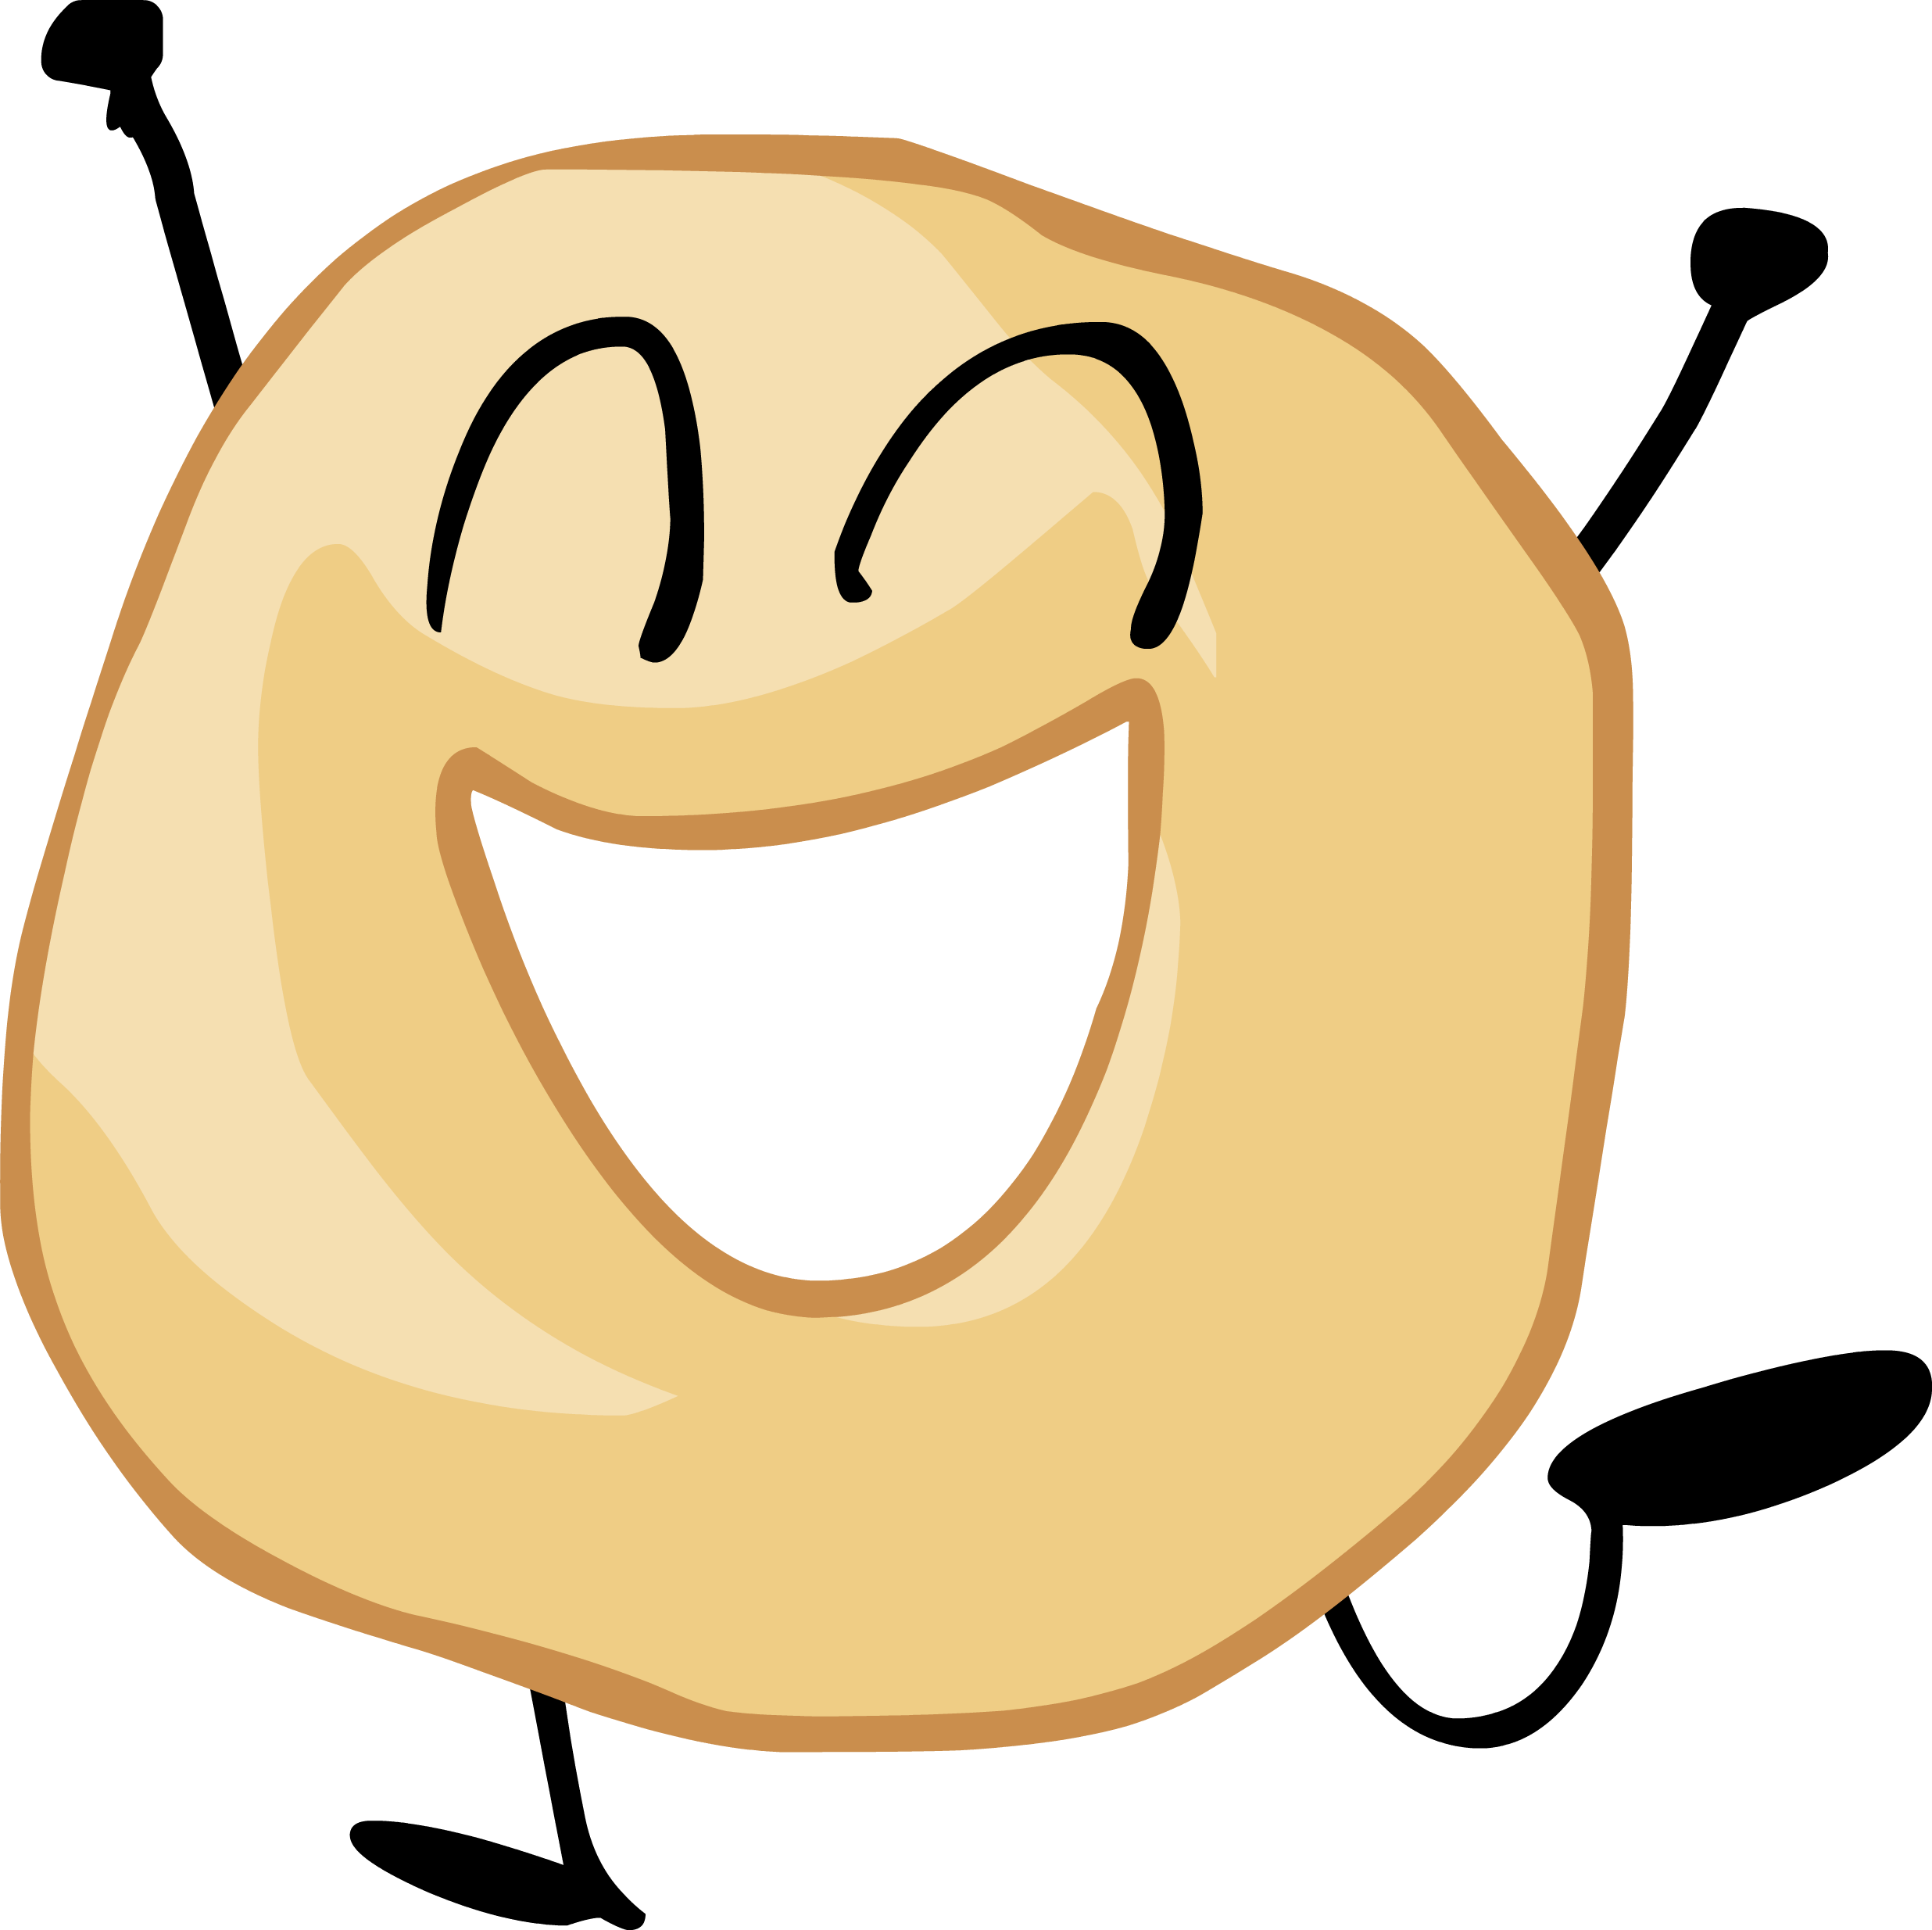 A Cartoon Of A Doughnut With A Face And Mouth